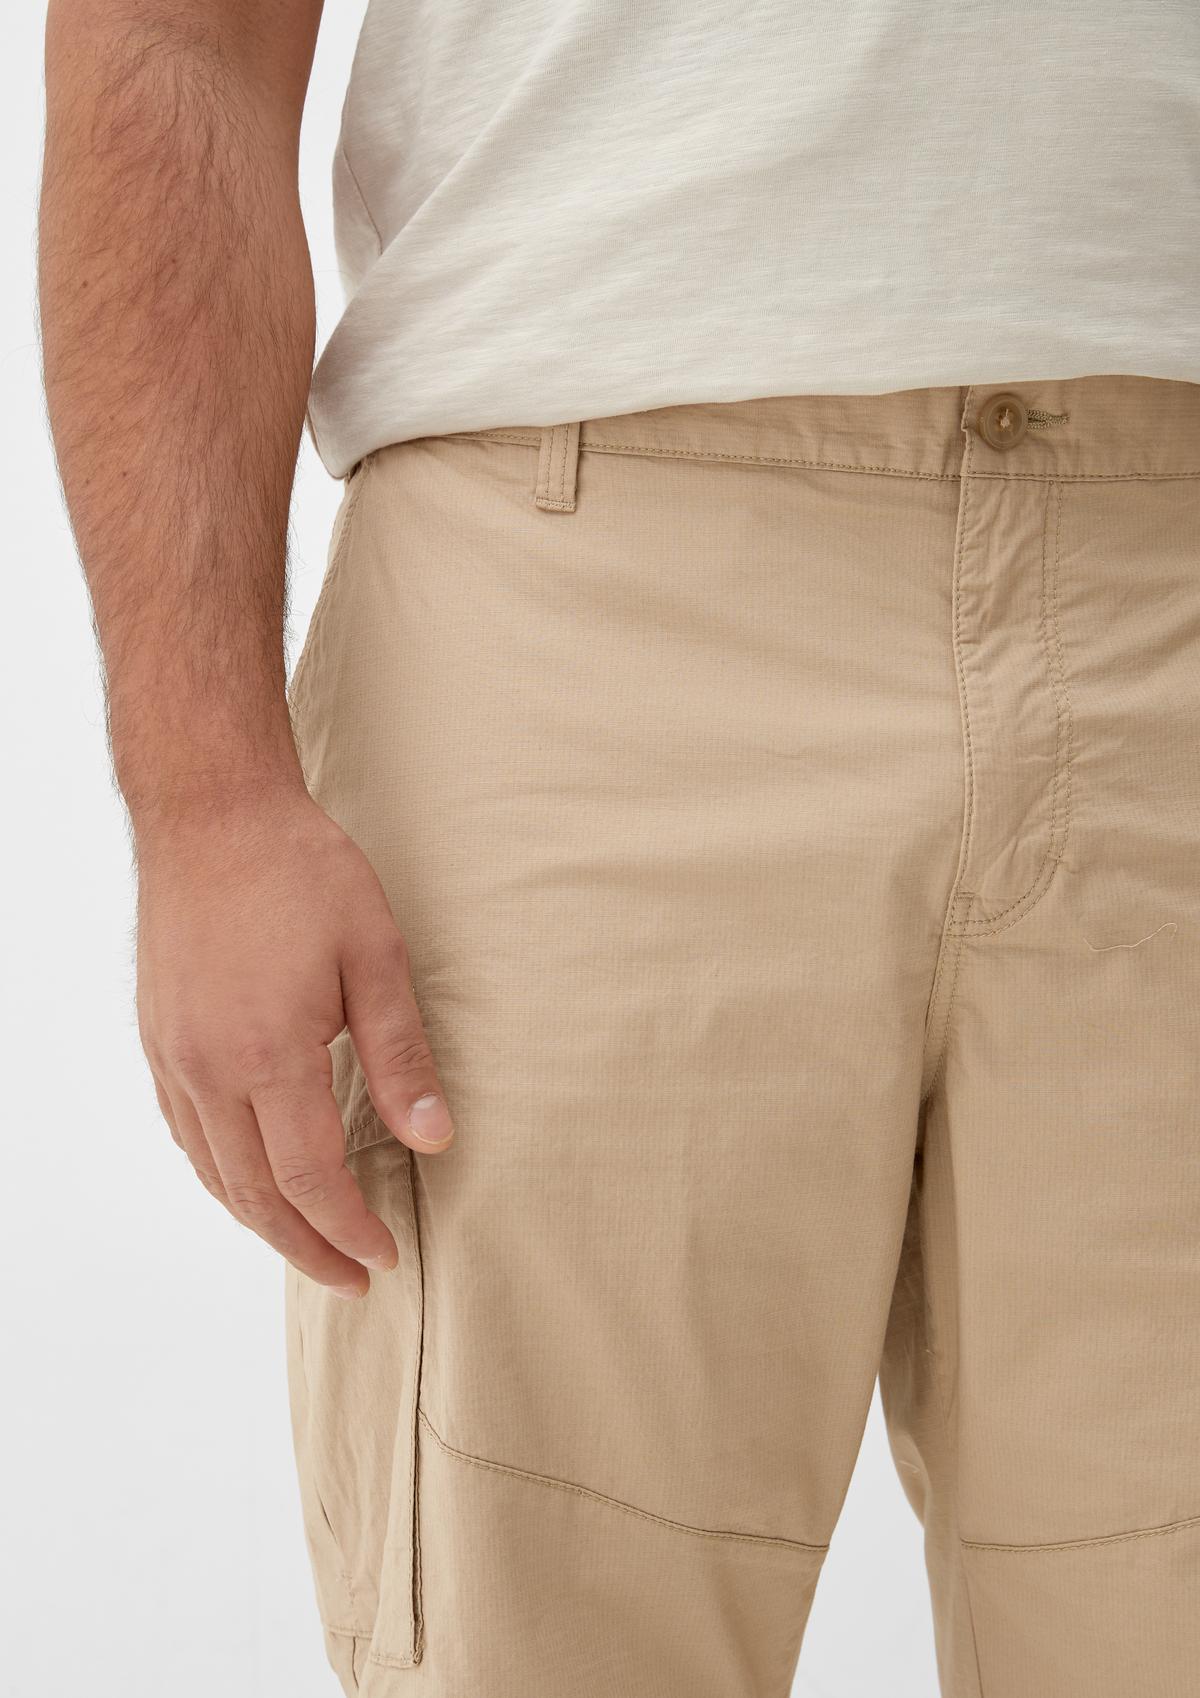 pockets Relaxed - olive Bermudas with cargo fit: